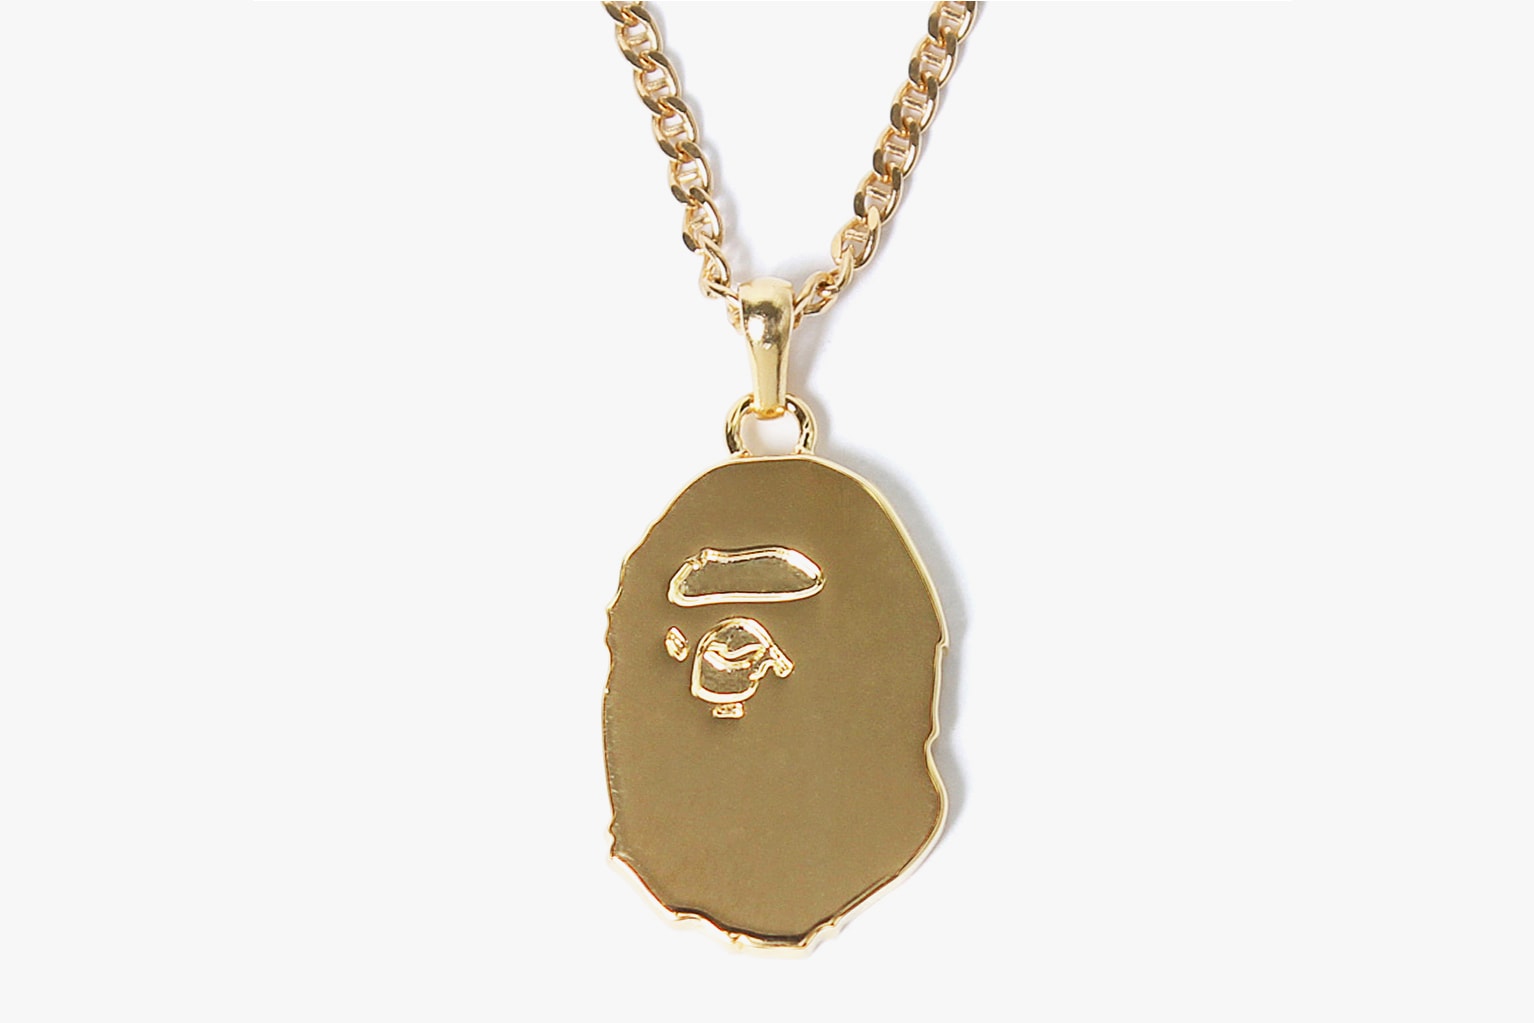 BAPE gold ring necklace